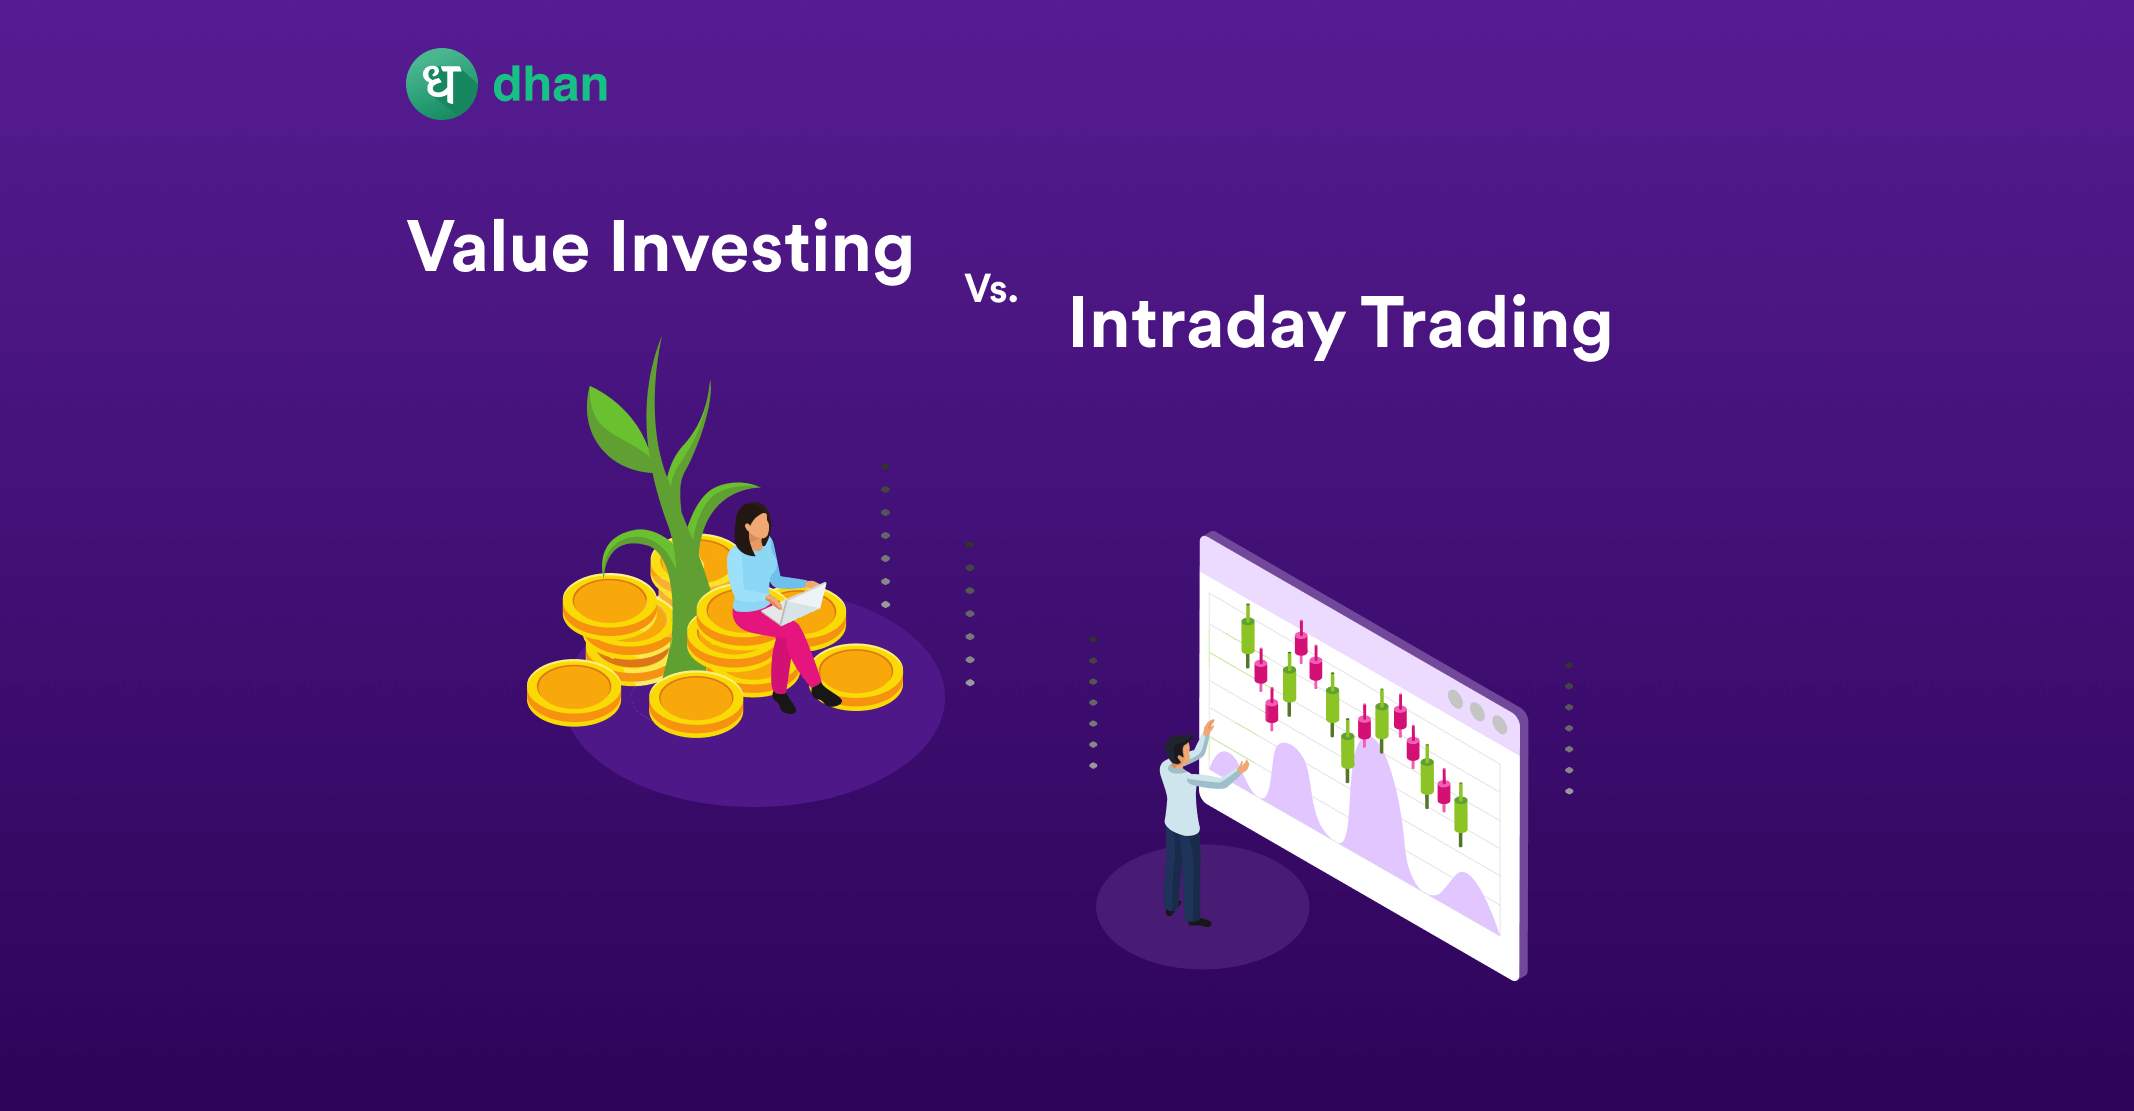 Value Investing vs Intraday Trading